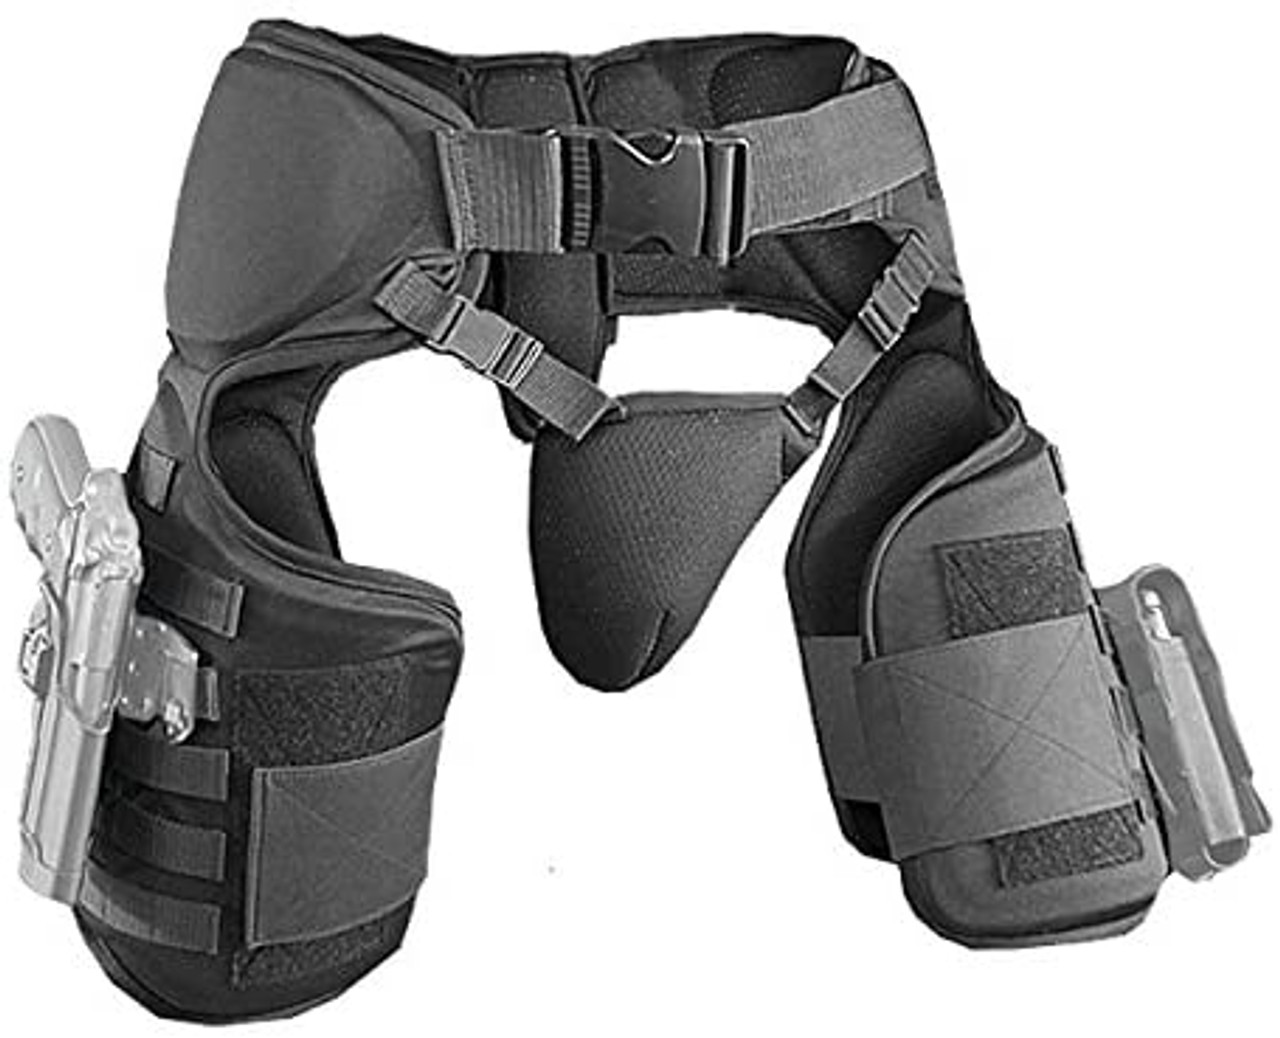 DAMASCUS GEAR IMPERIAL THIGH/GROIN PROTECTOR WITH MOLLE SYSTEM